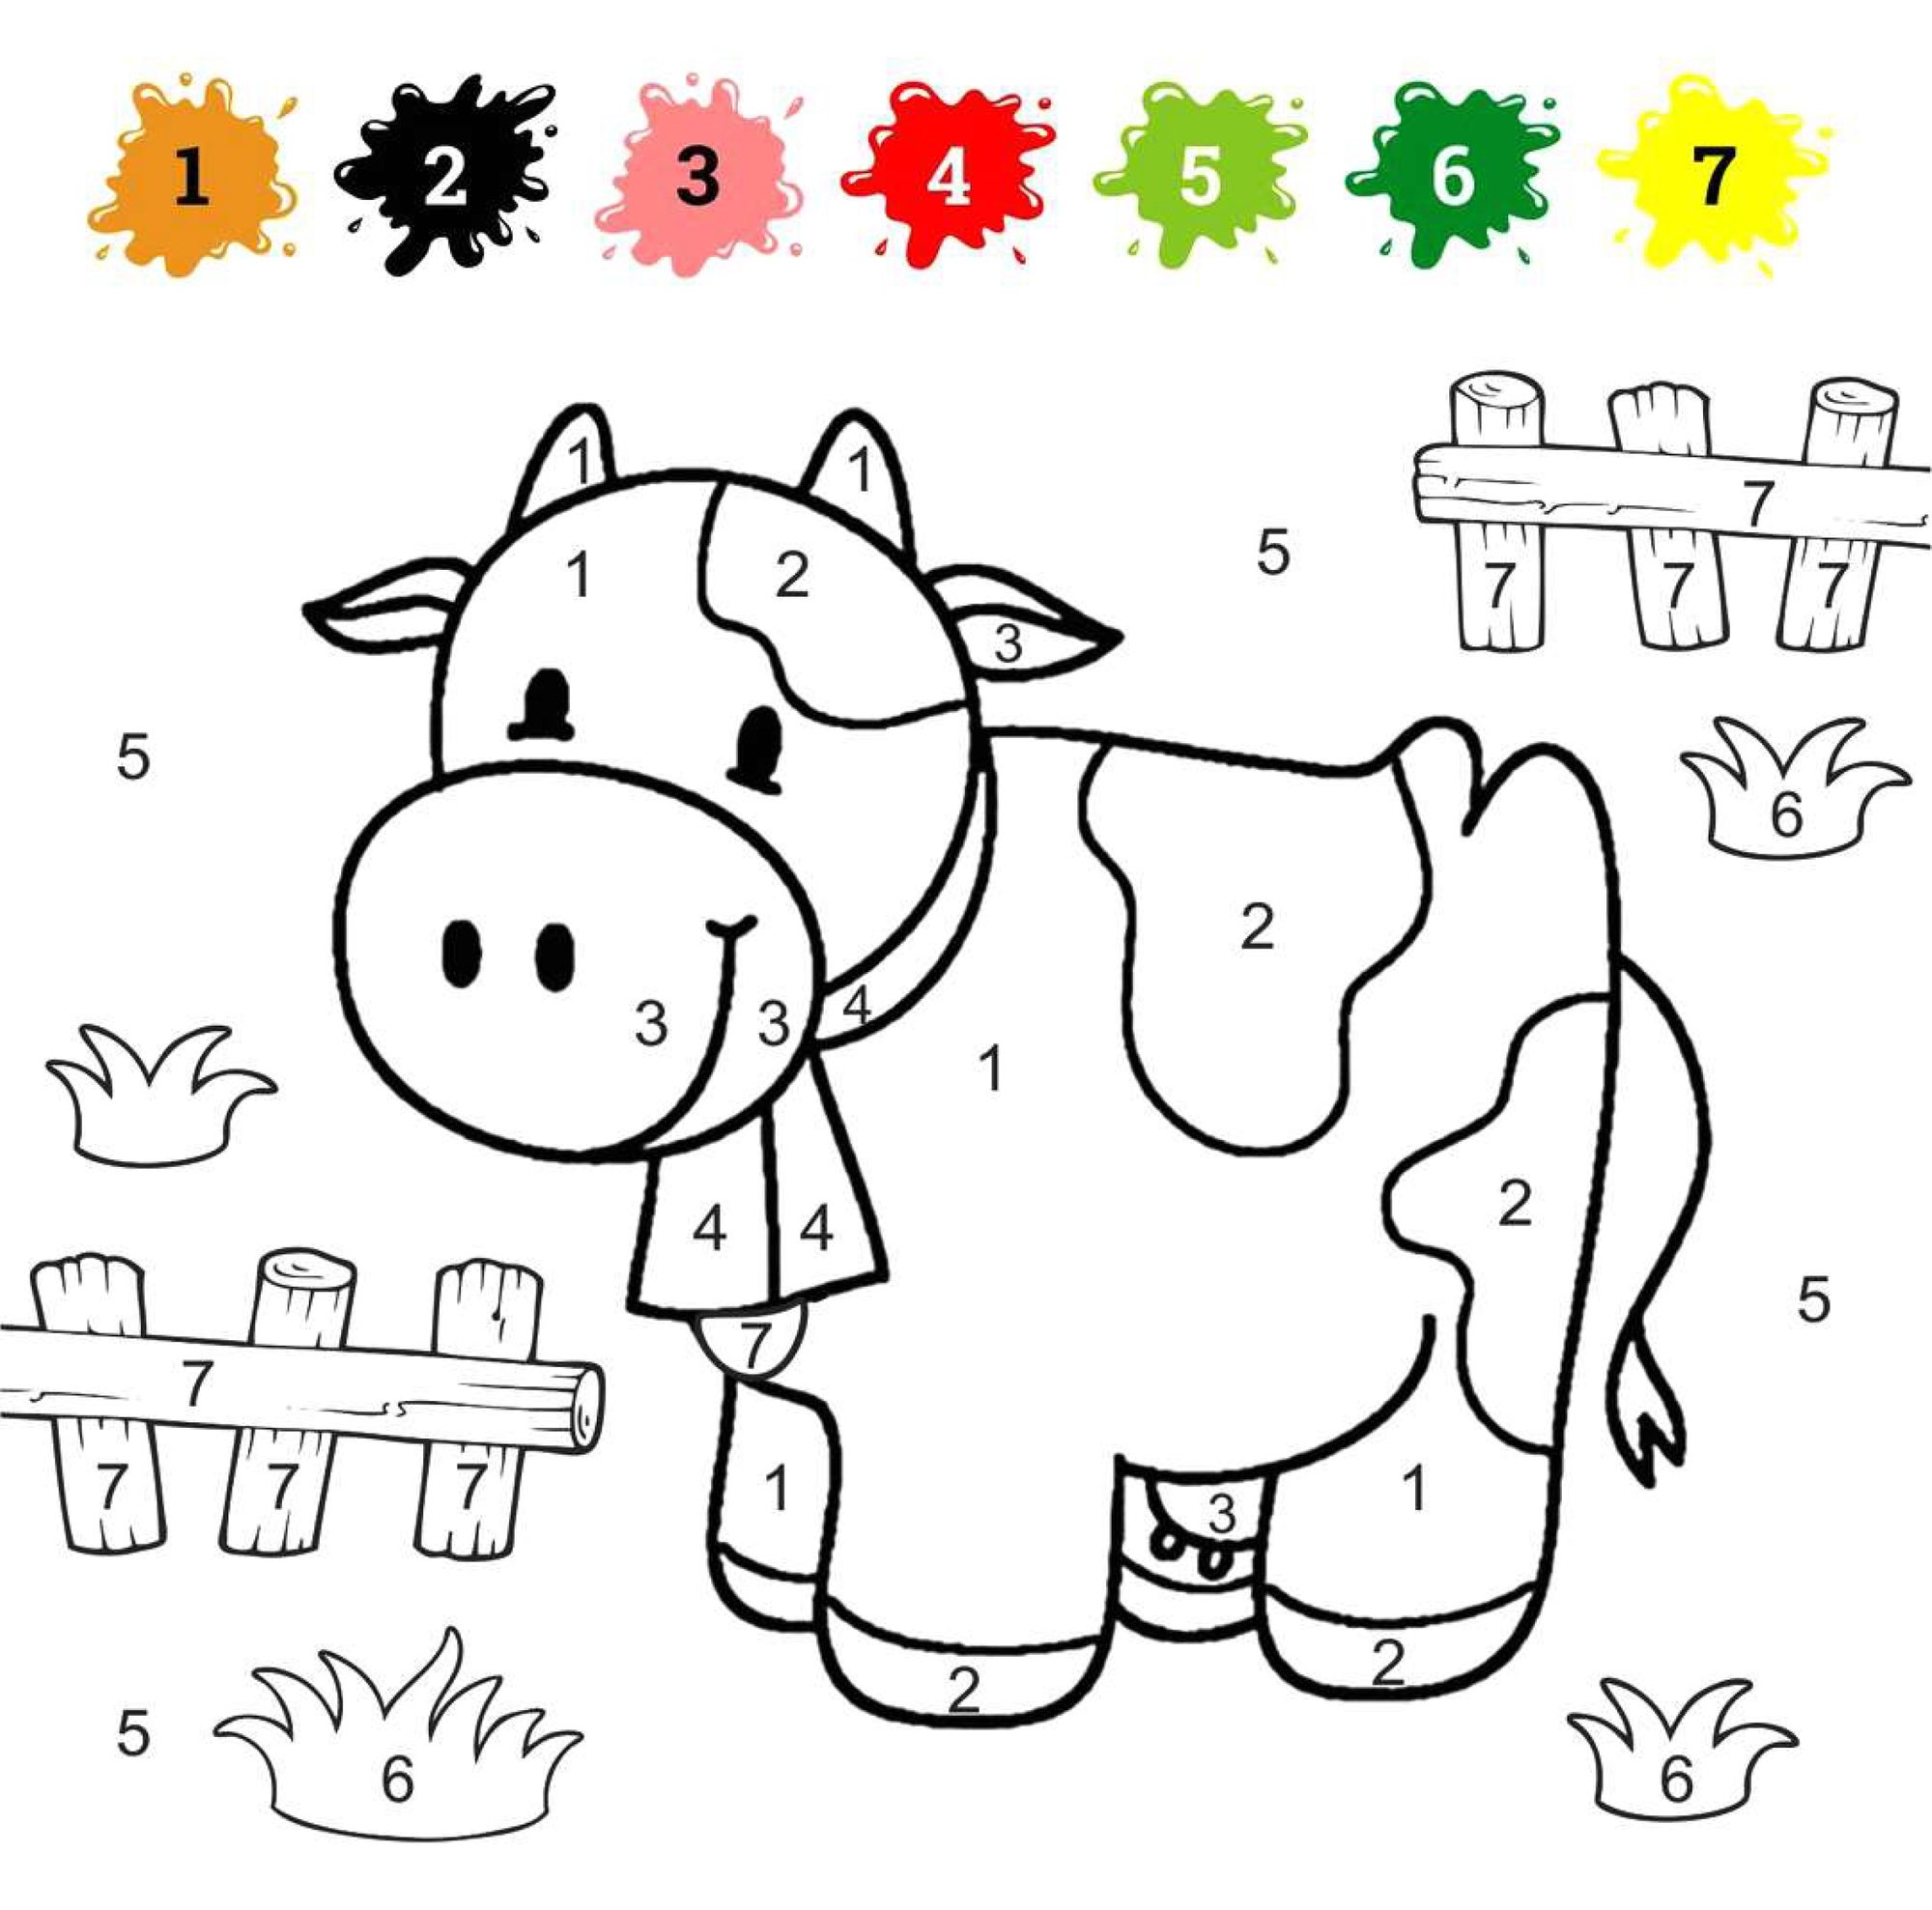 Coloring by Numbers for Children